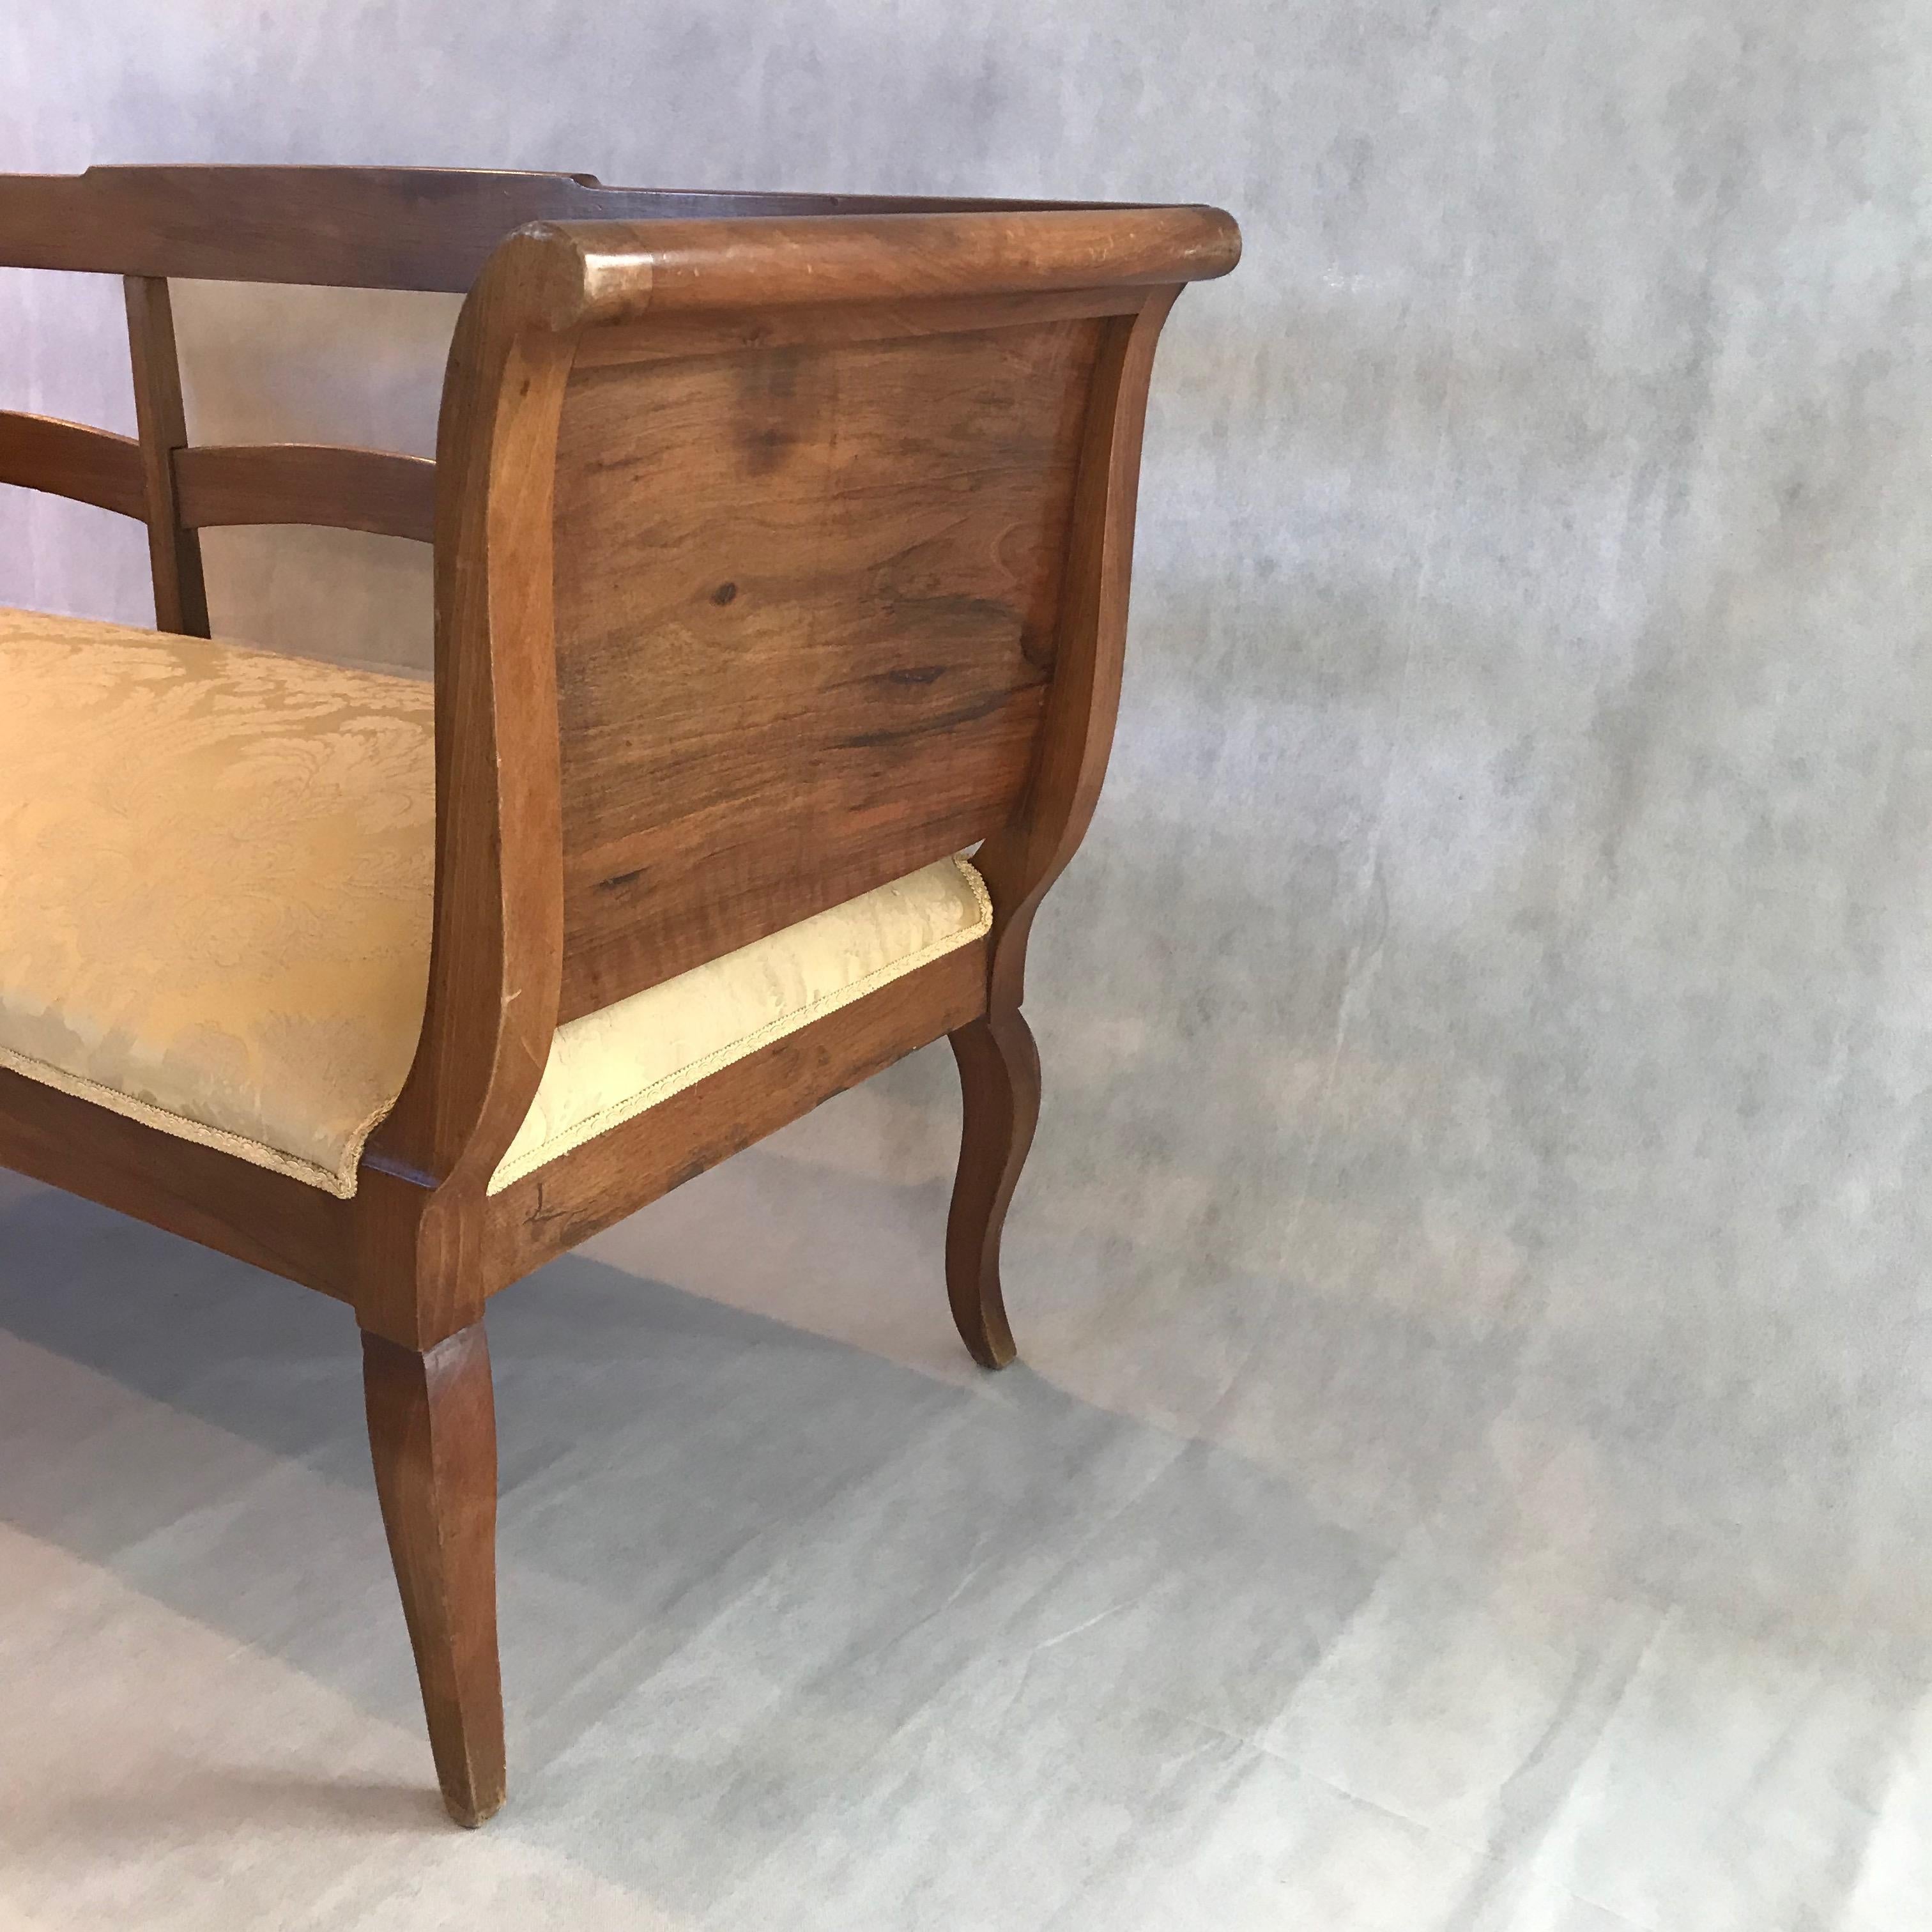 A fine walnut sleigh style settee or sofa having lovely curves, cabrioile legs, and elegant satiny golden jacard uphostery.